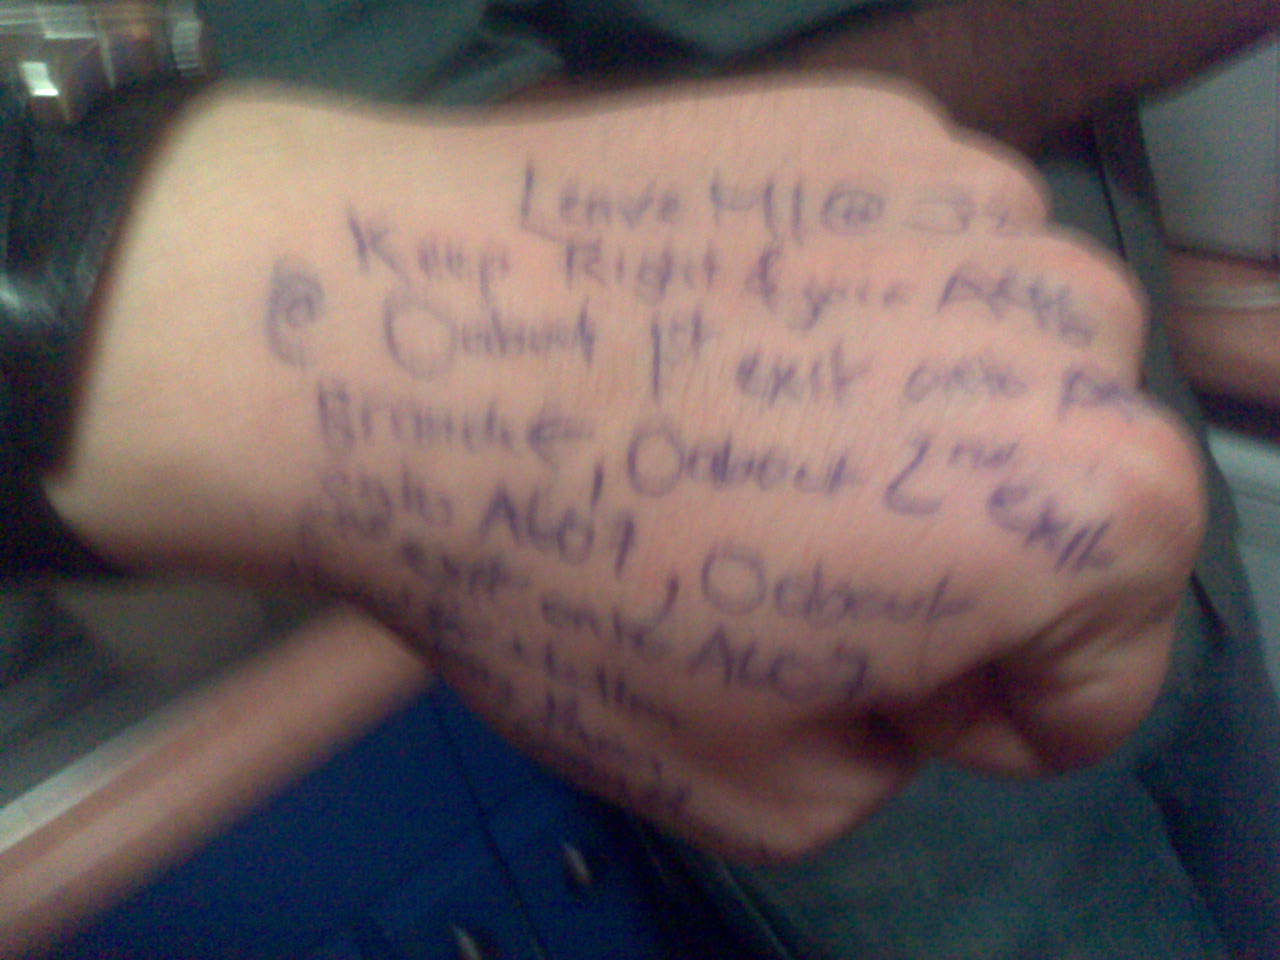 Dai's directions on the back of his hand......